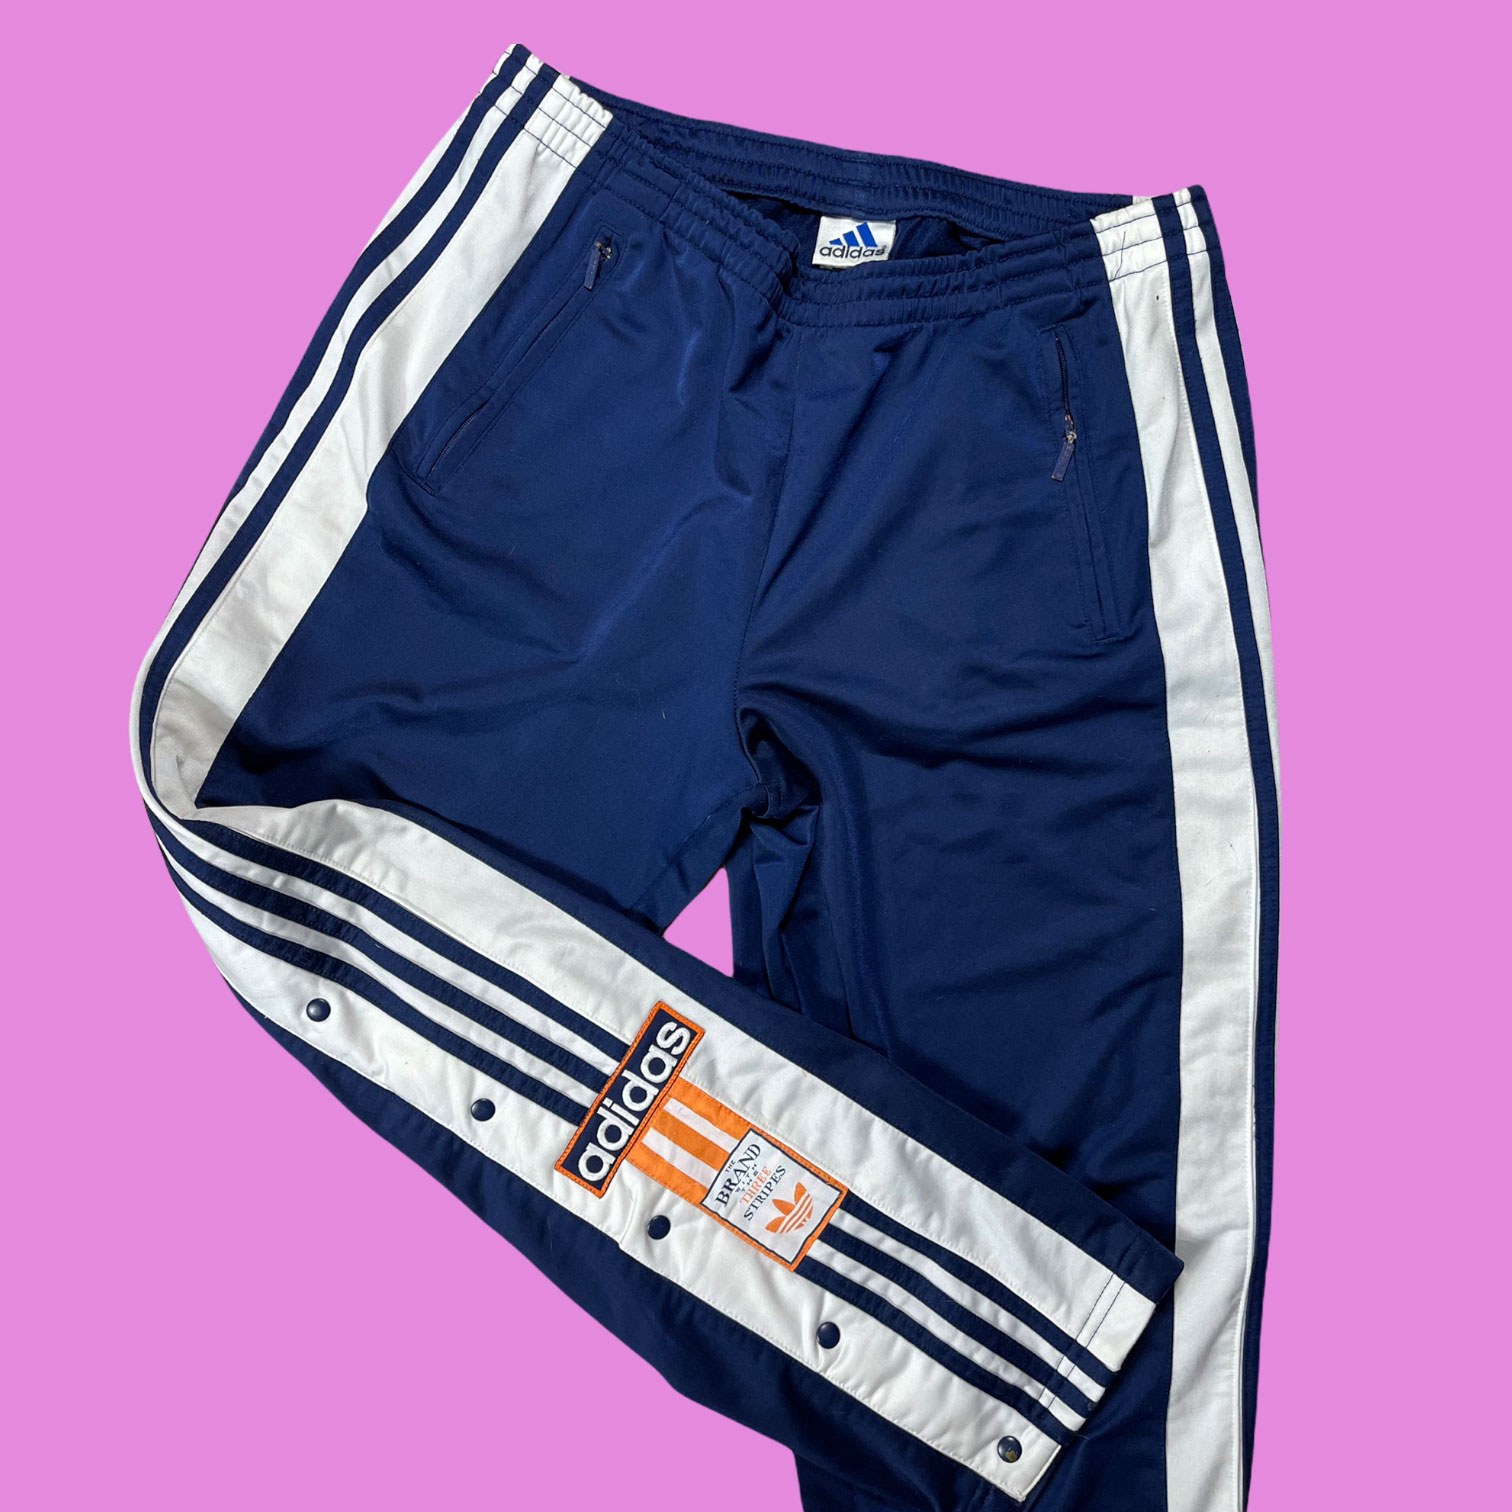 Adidas Button Track pants Mens Fashion Bottoms Trousers on Carousell